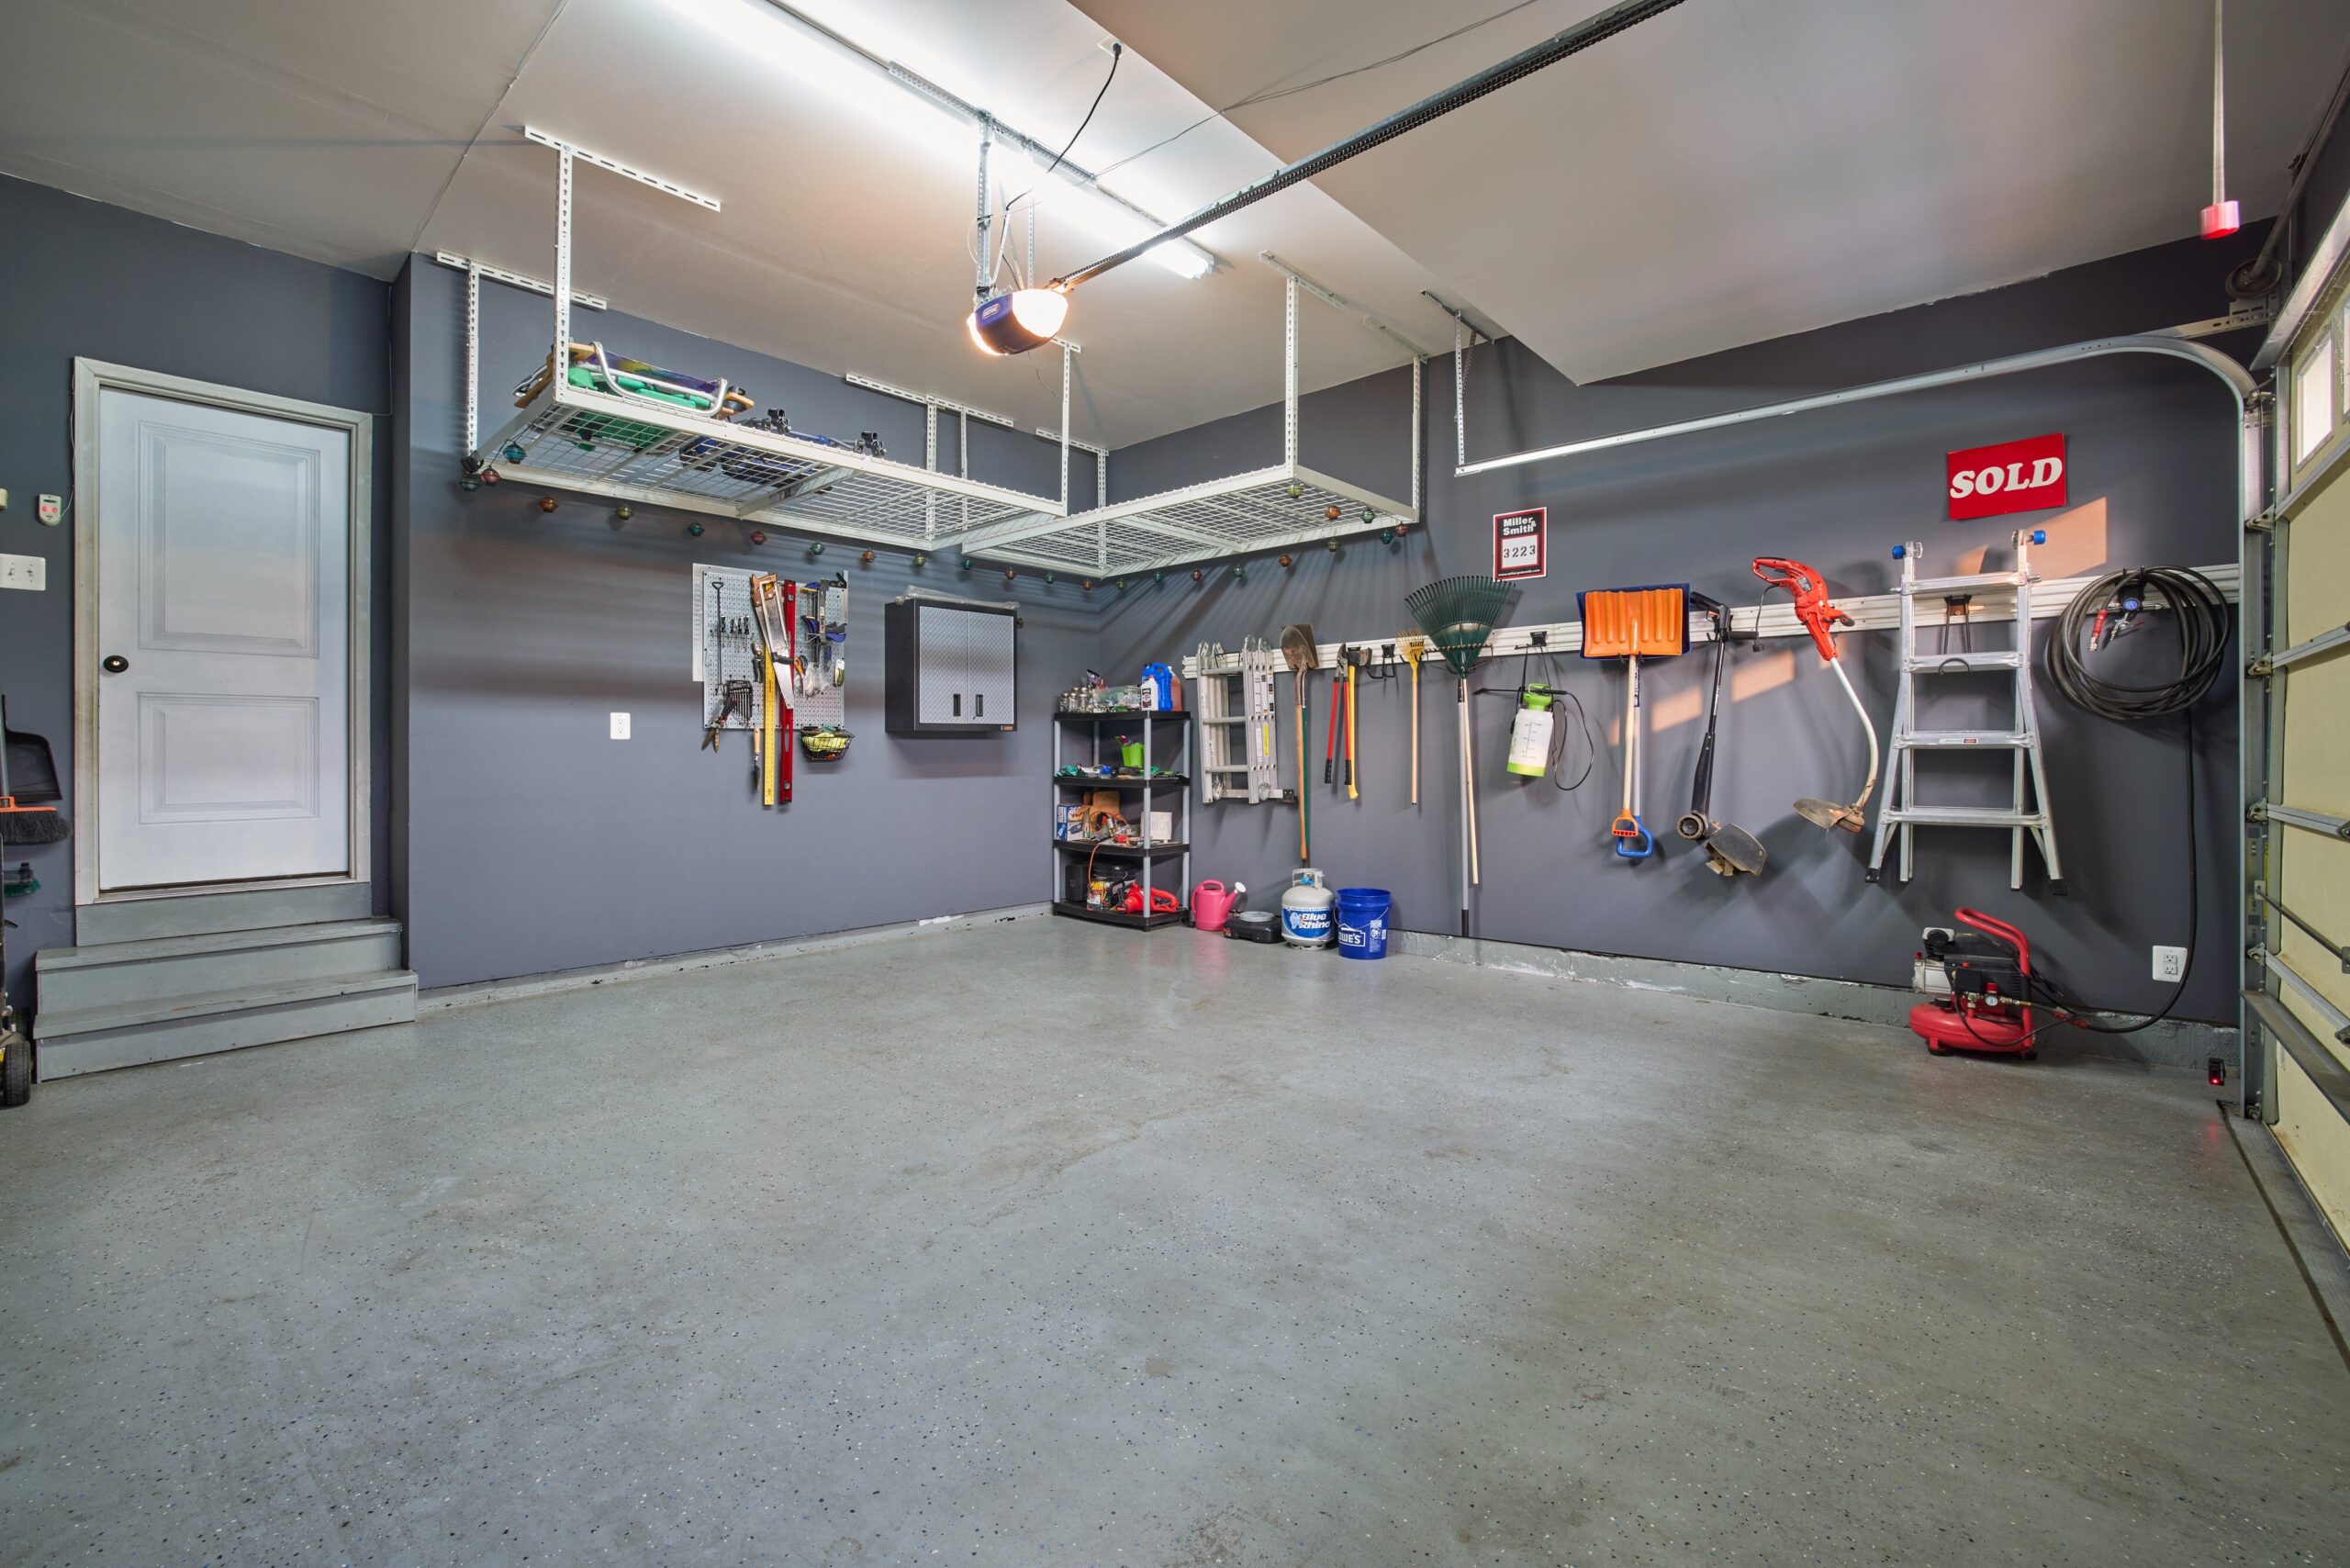 Professional interior photo of 12030 Lake Dorian Drive, Bristow, VA - showing the inside of a 2-car garage, perfectly clean with wall racks for hanging large tools and ceiling racks for additional storage